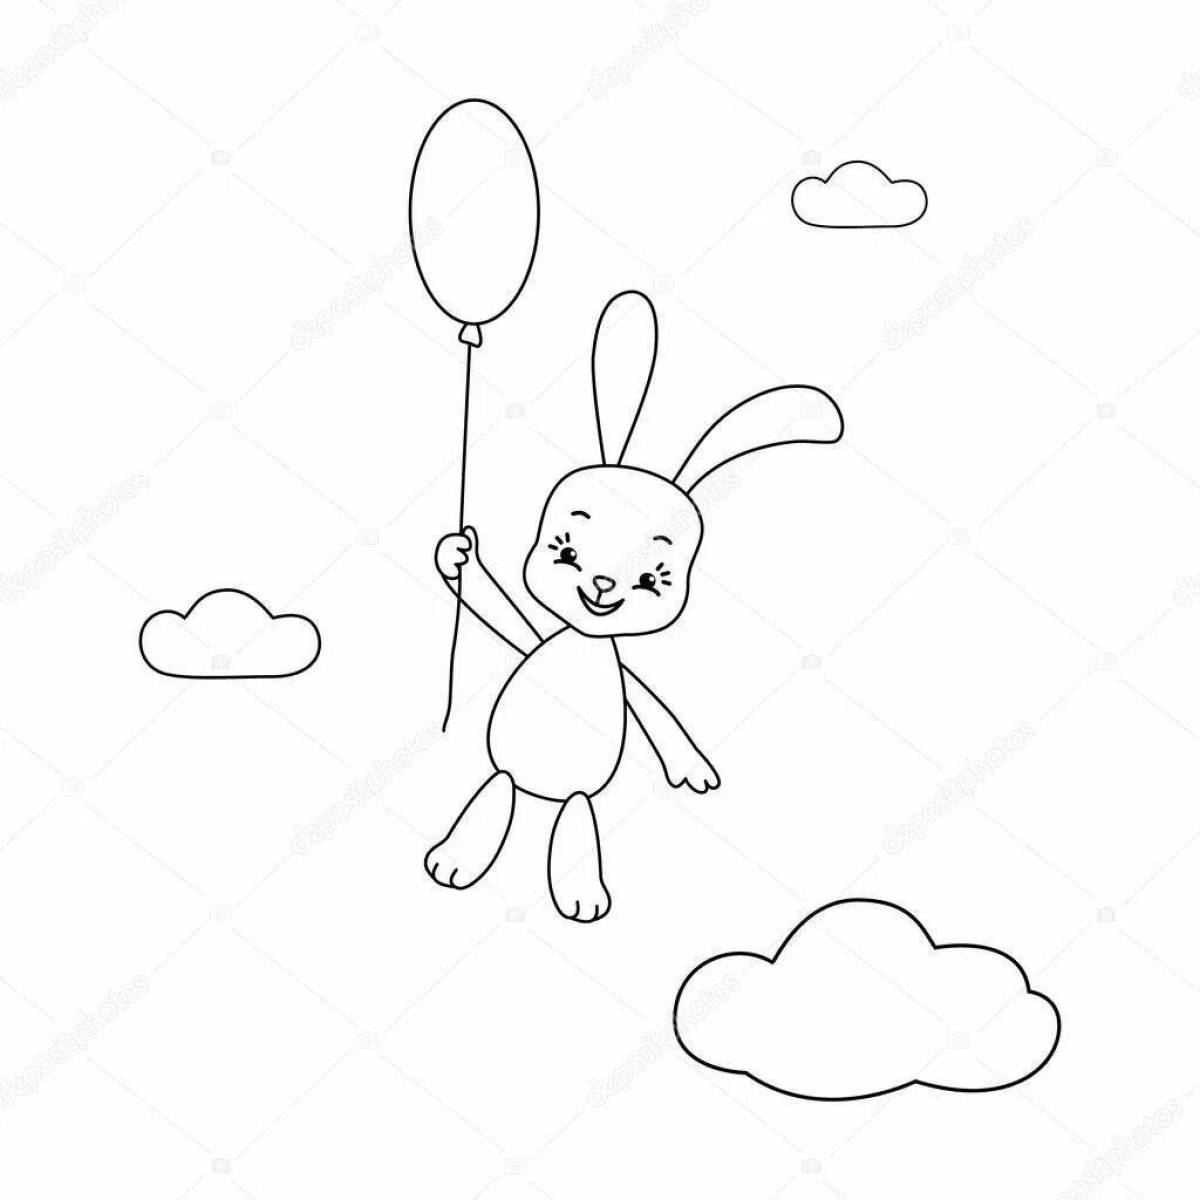 Happy bunny with balloons